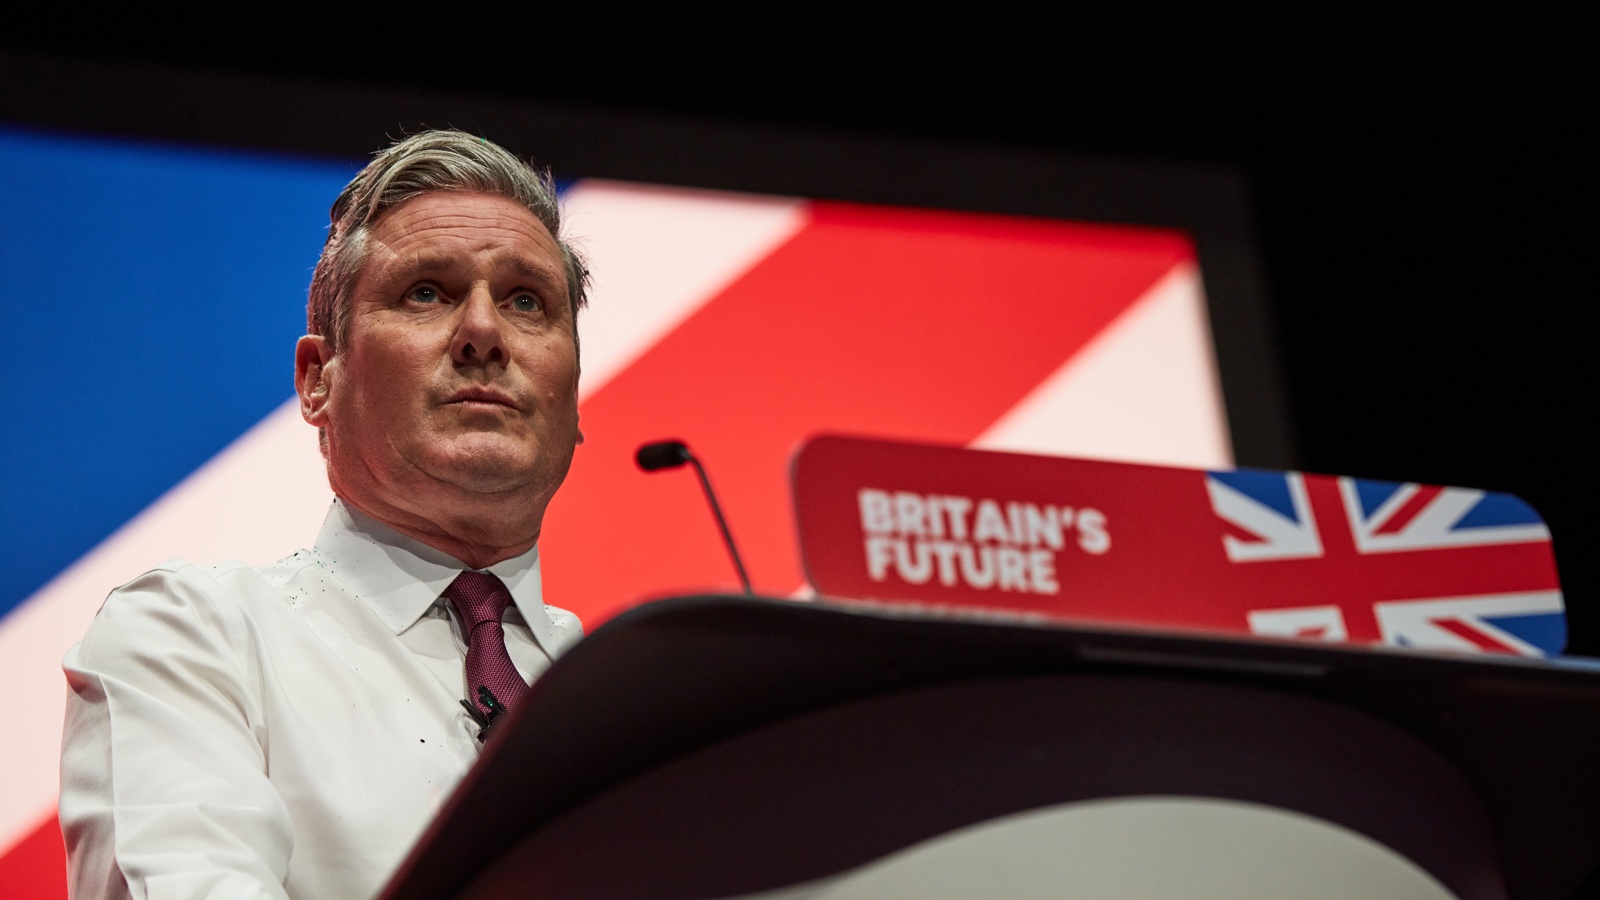 A new day, a new government - the engineering and technology sector reacts to Labour pledges